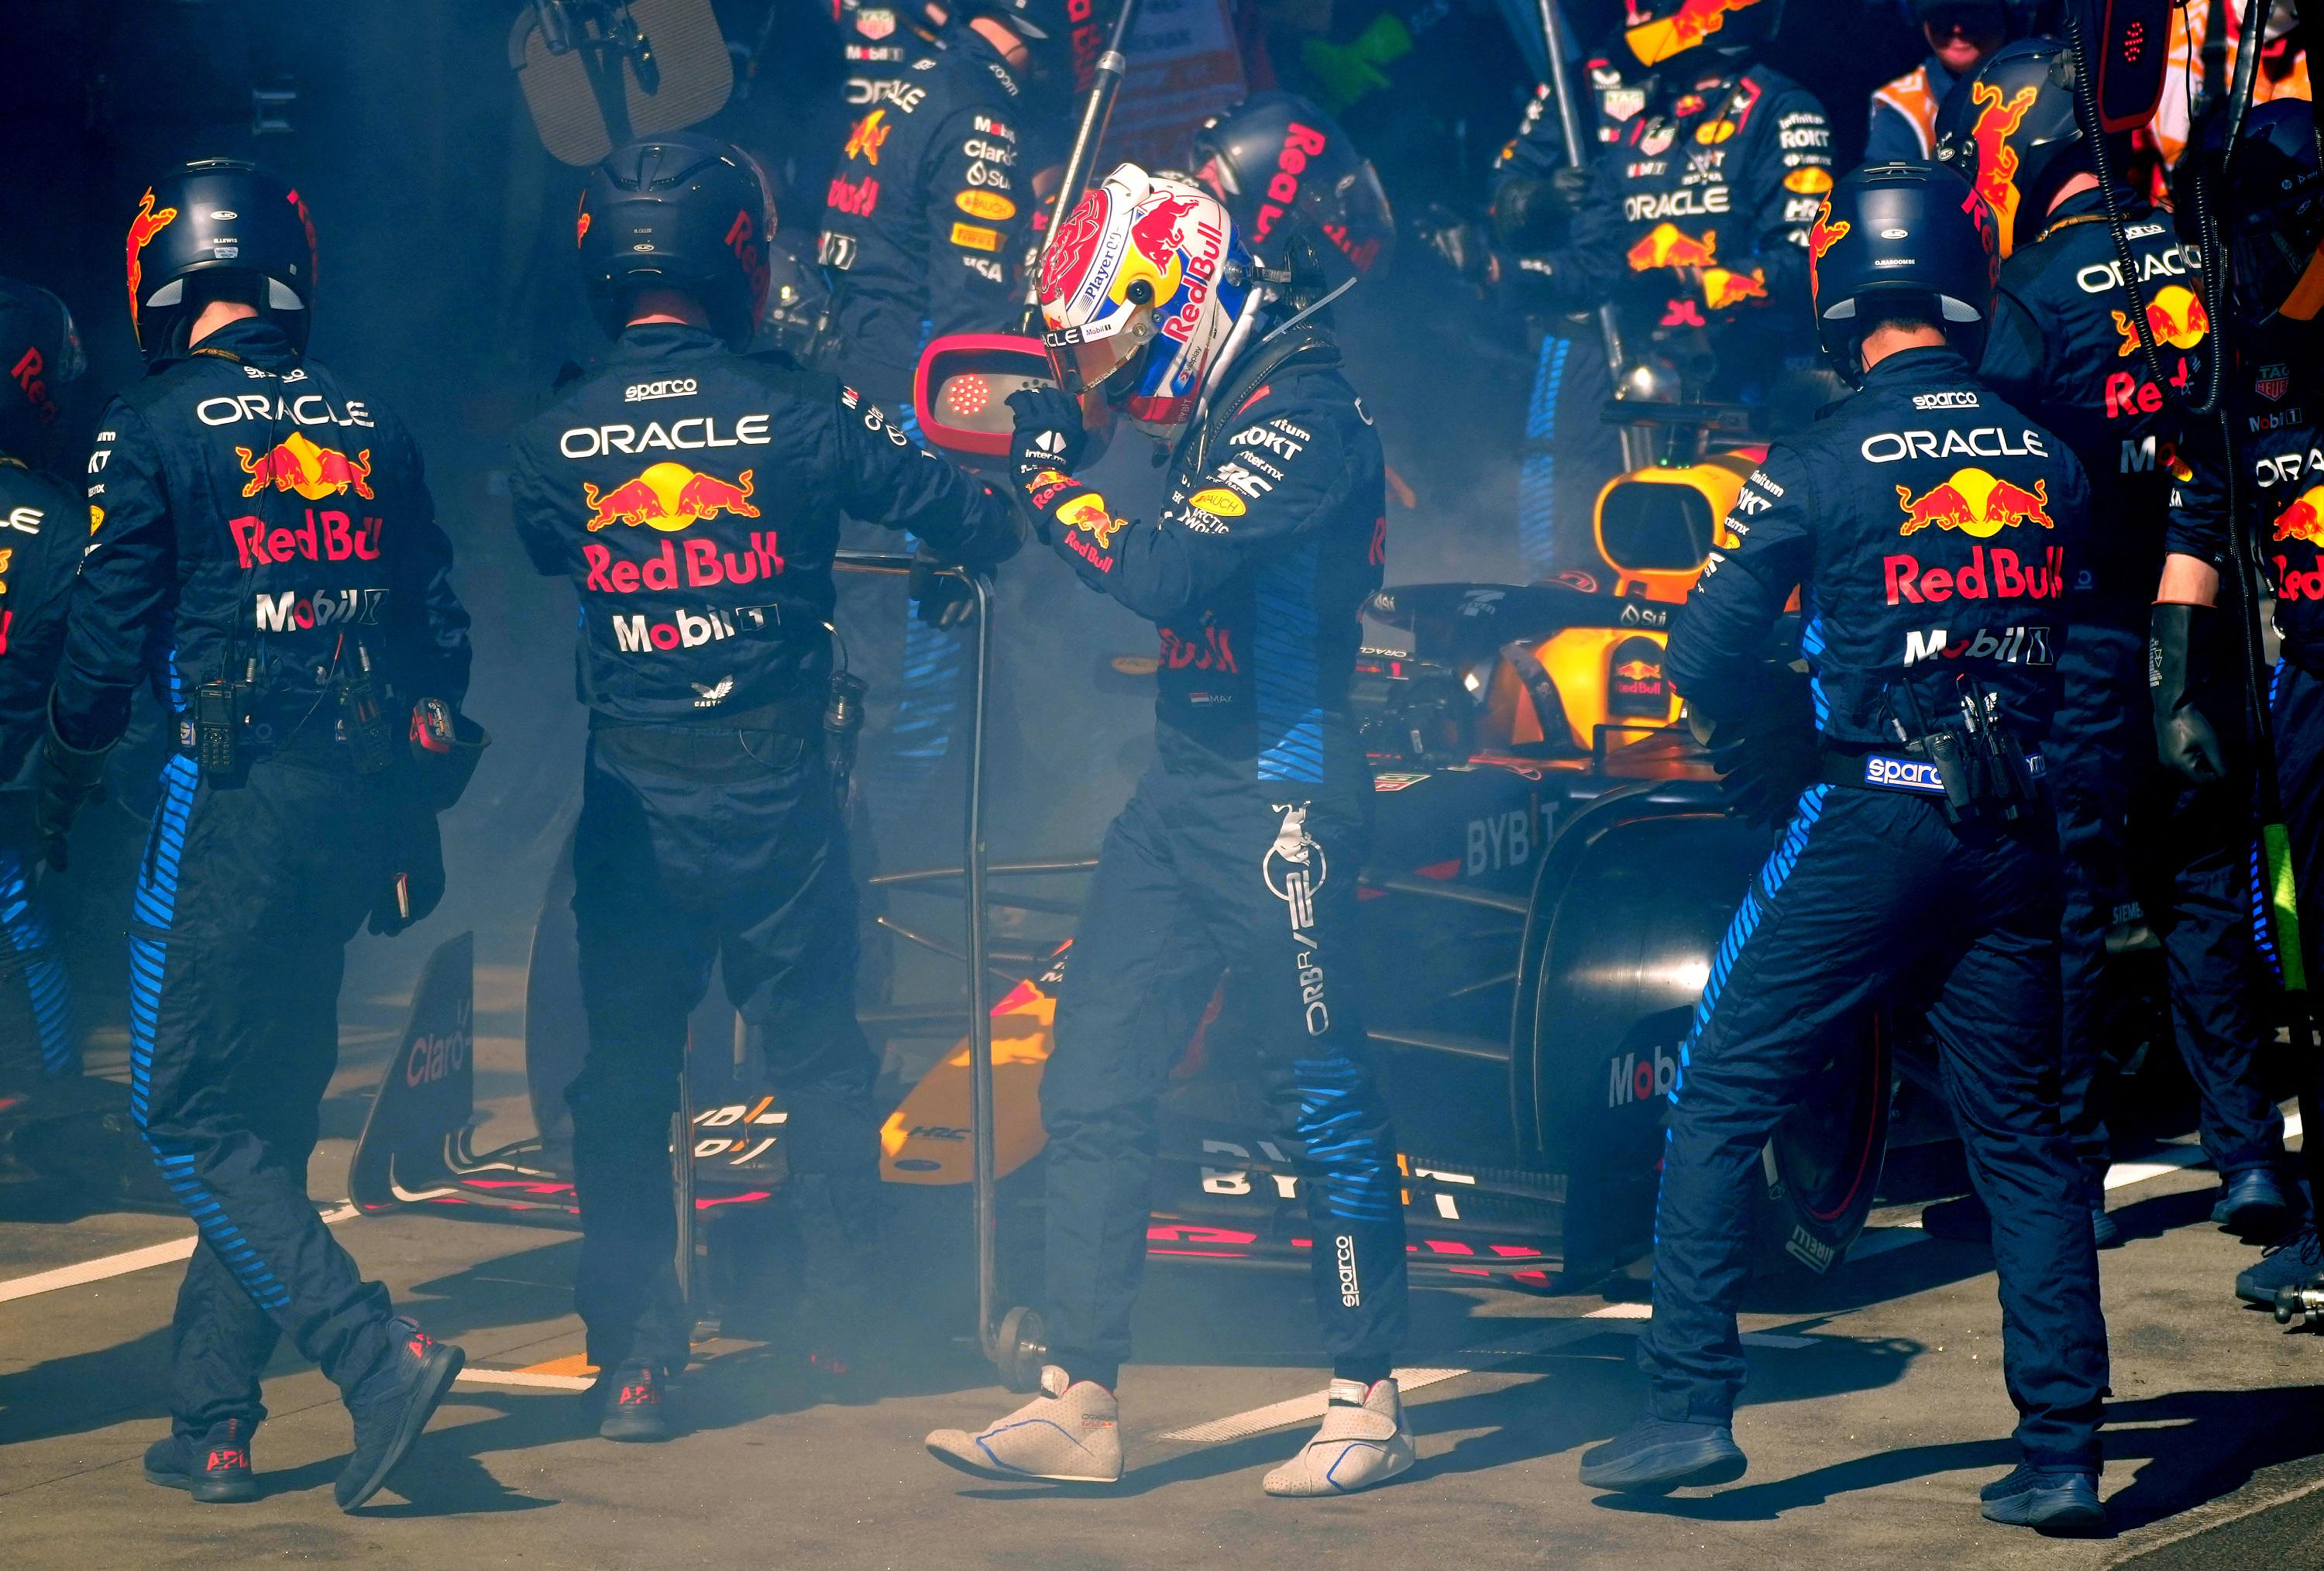 Formula 1: in video, the retirement of Max Verstappen in Melbourne due to mechanical failure